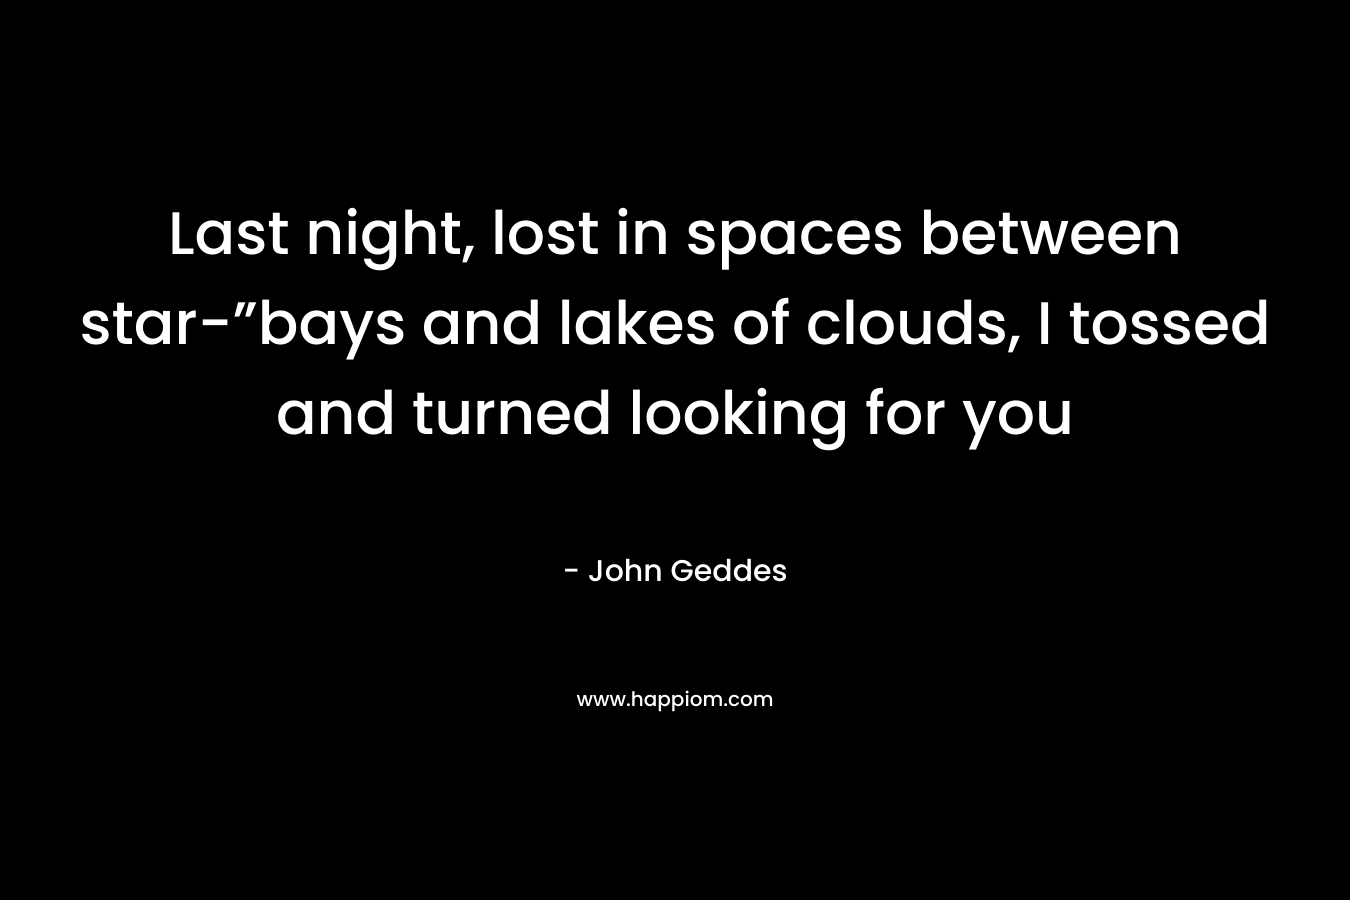 Last night, lost in spaces between star-”bays and lakes of clouds, I tossed and turned looking for you – John Geddes